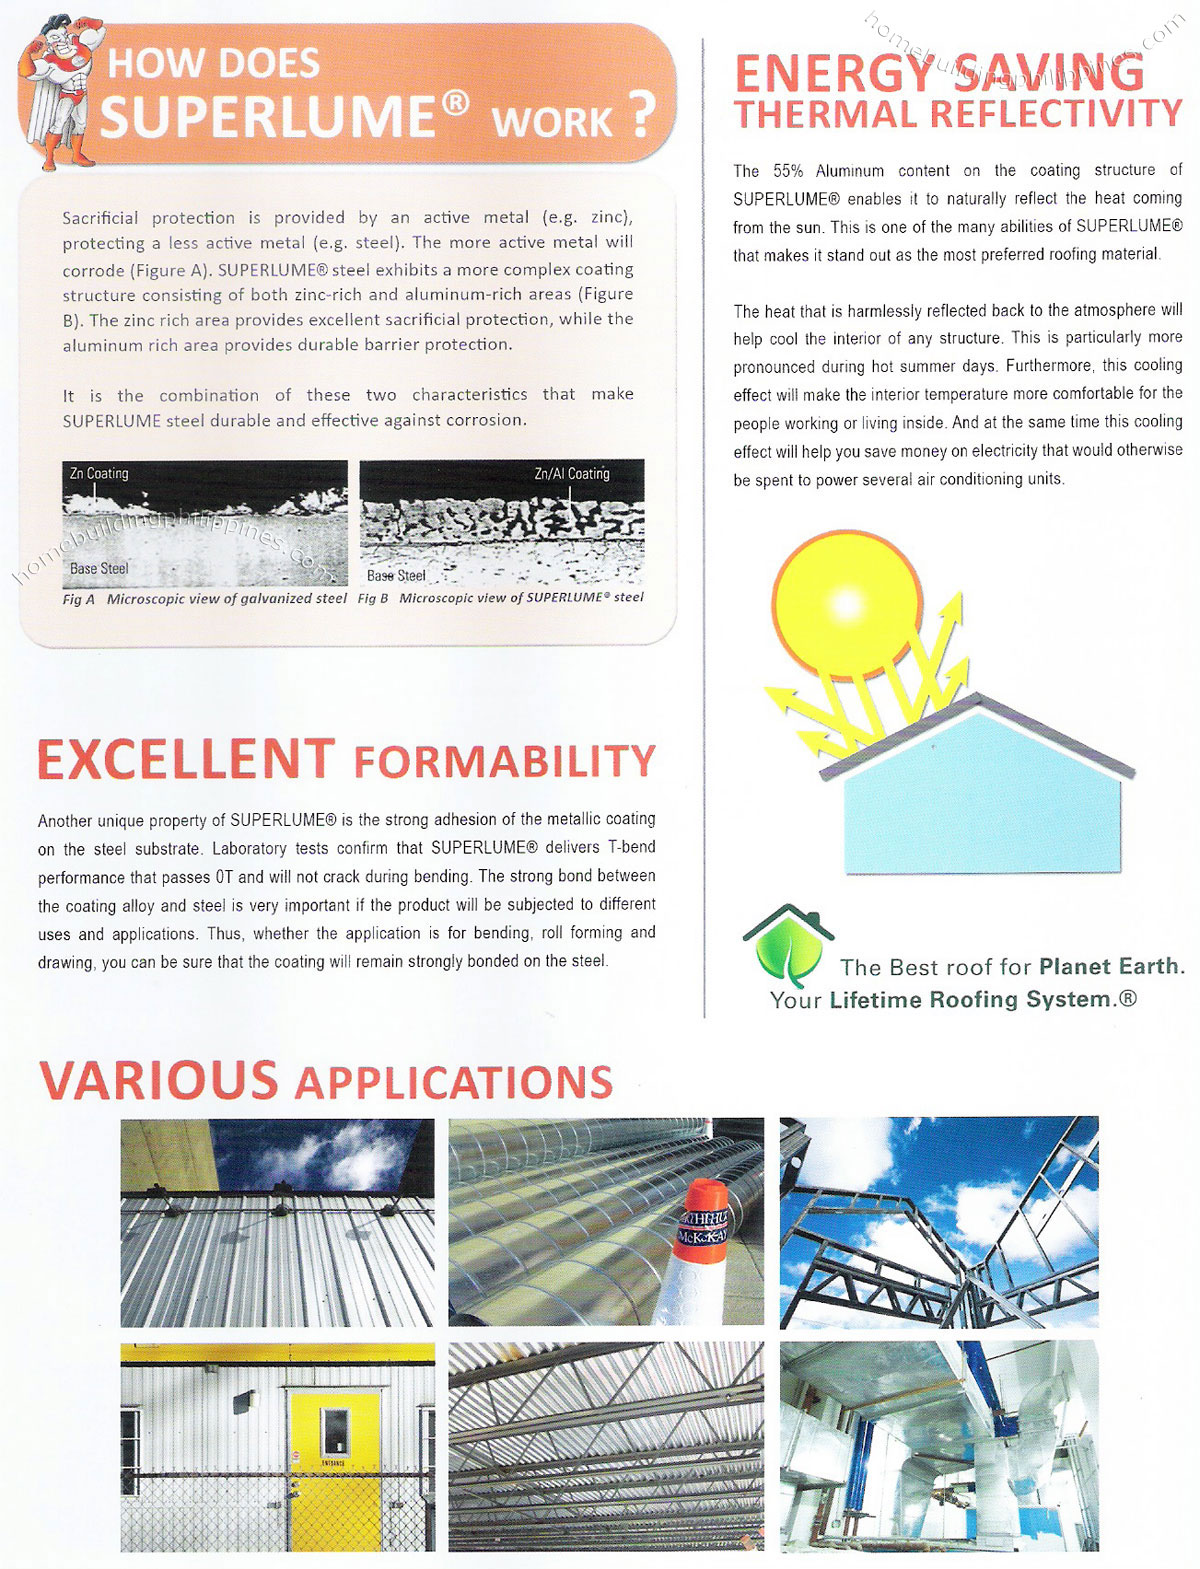 superlume steel roofing energy saving thermal reflectivity formability applications